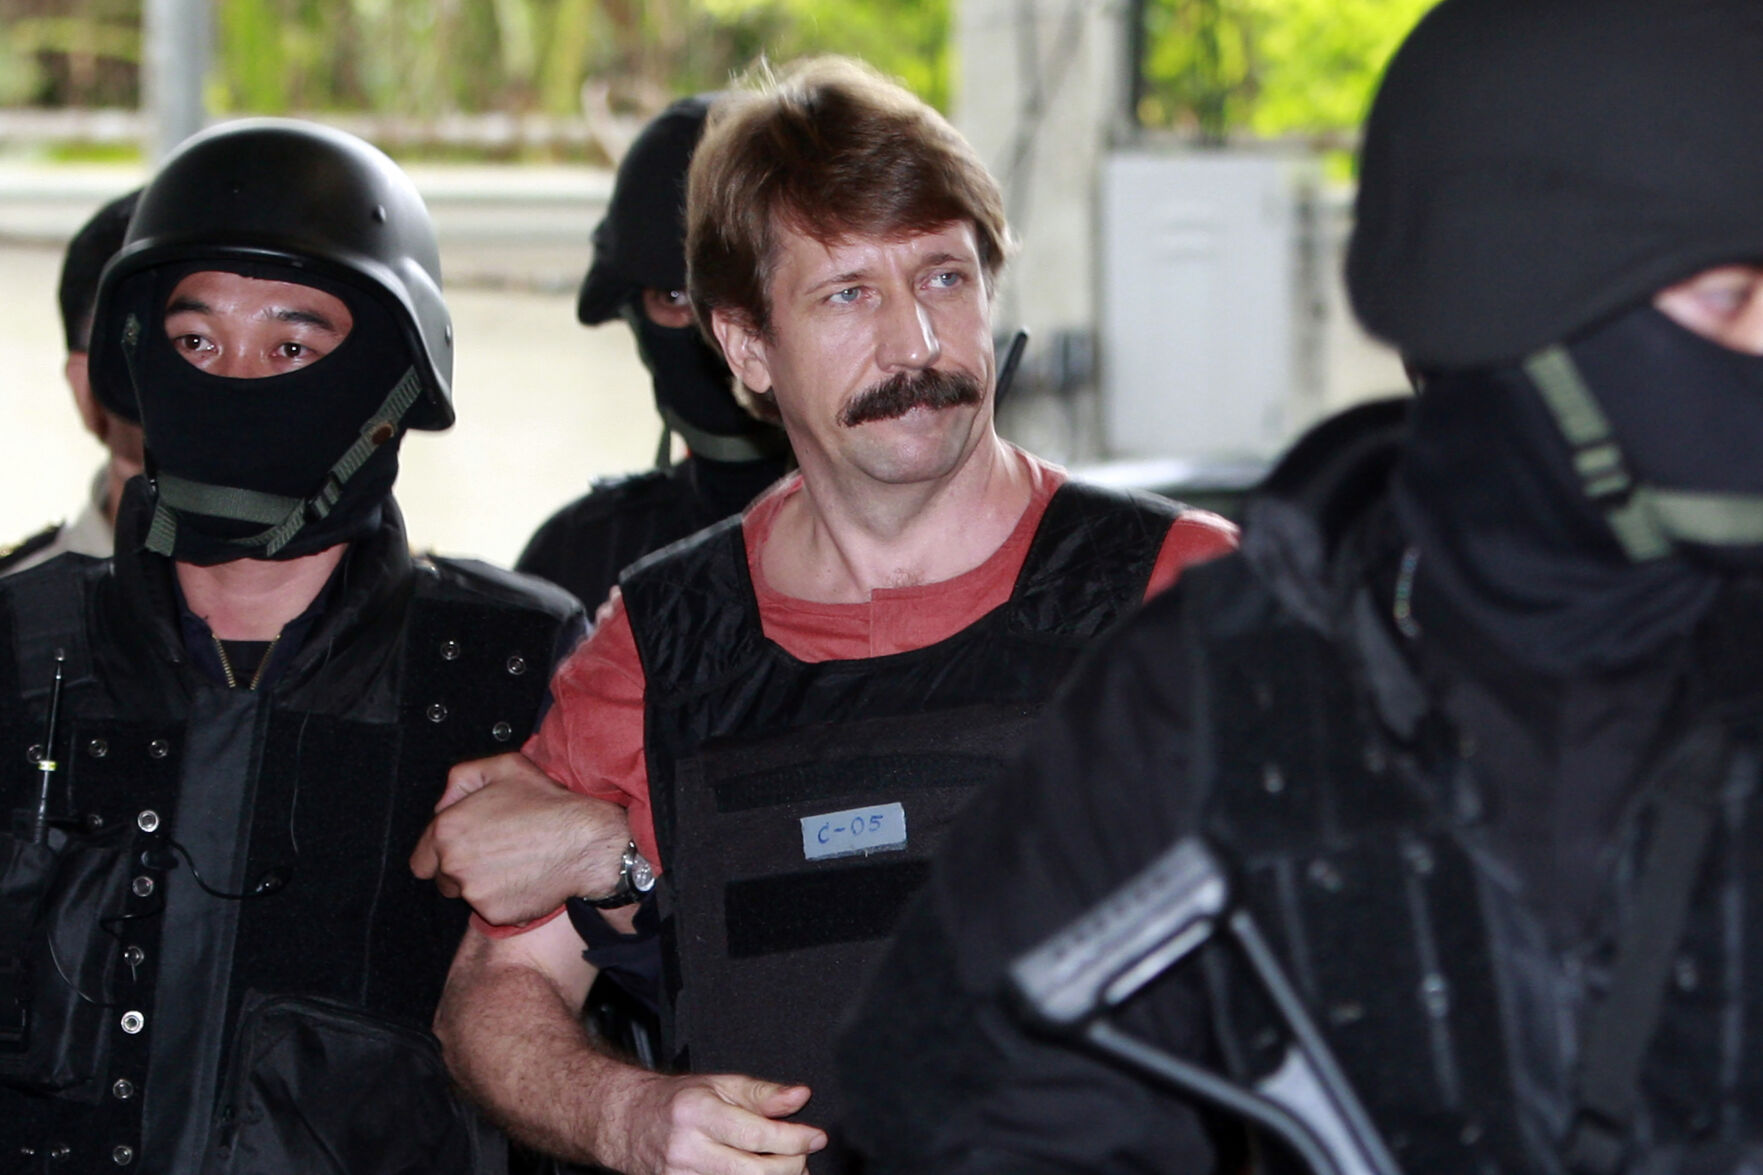 <p>FILE - Suspected Russian arms smuggler Viktor Bout, center, is led by armed Thai police commandos as he arrives at the criminal court in Bangkok, Thailand in Oct. 5, 2010. Russia has freed WNBA star Brittney Griner on Thursday in a dramatic high-level prisoner exchange, with the U.S. releasing notorious Russian arms dealer Viktor Bout. (AP Photo/Apichart Weerawong, File)</p>   PHOTO CREDIT: Apichart Weerawong - staff, AP